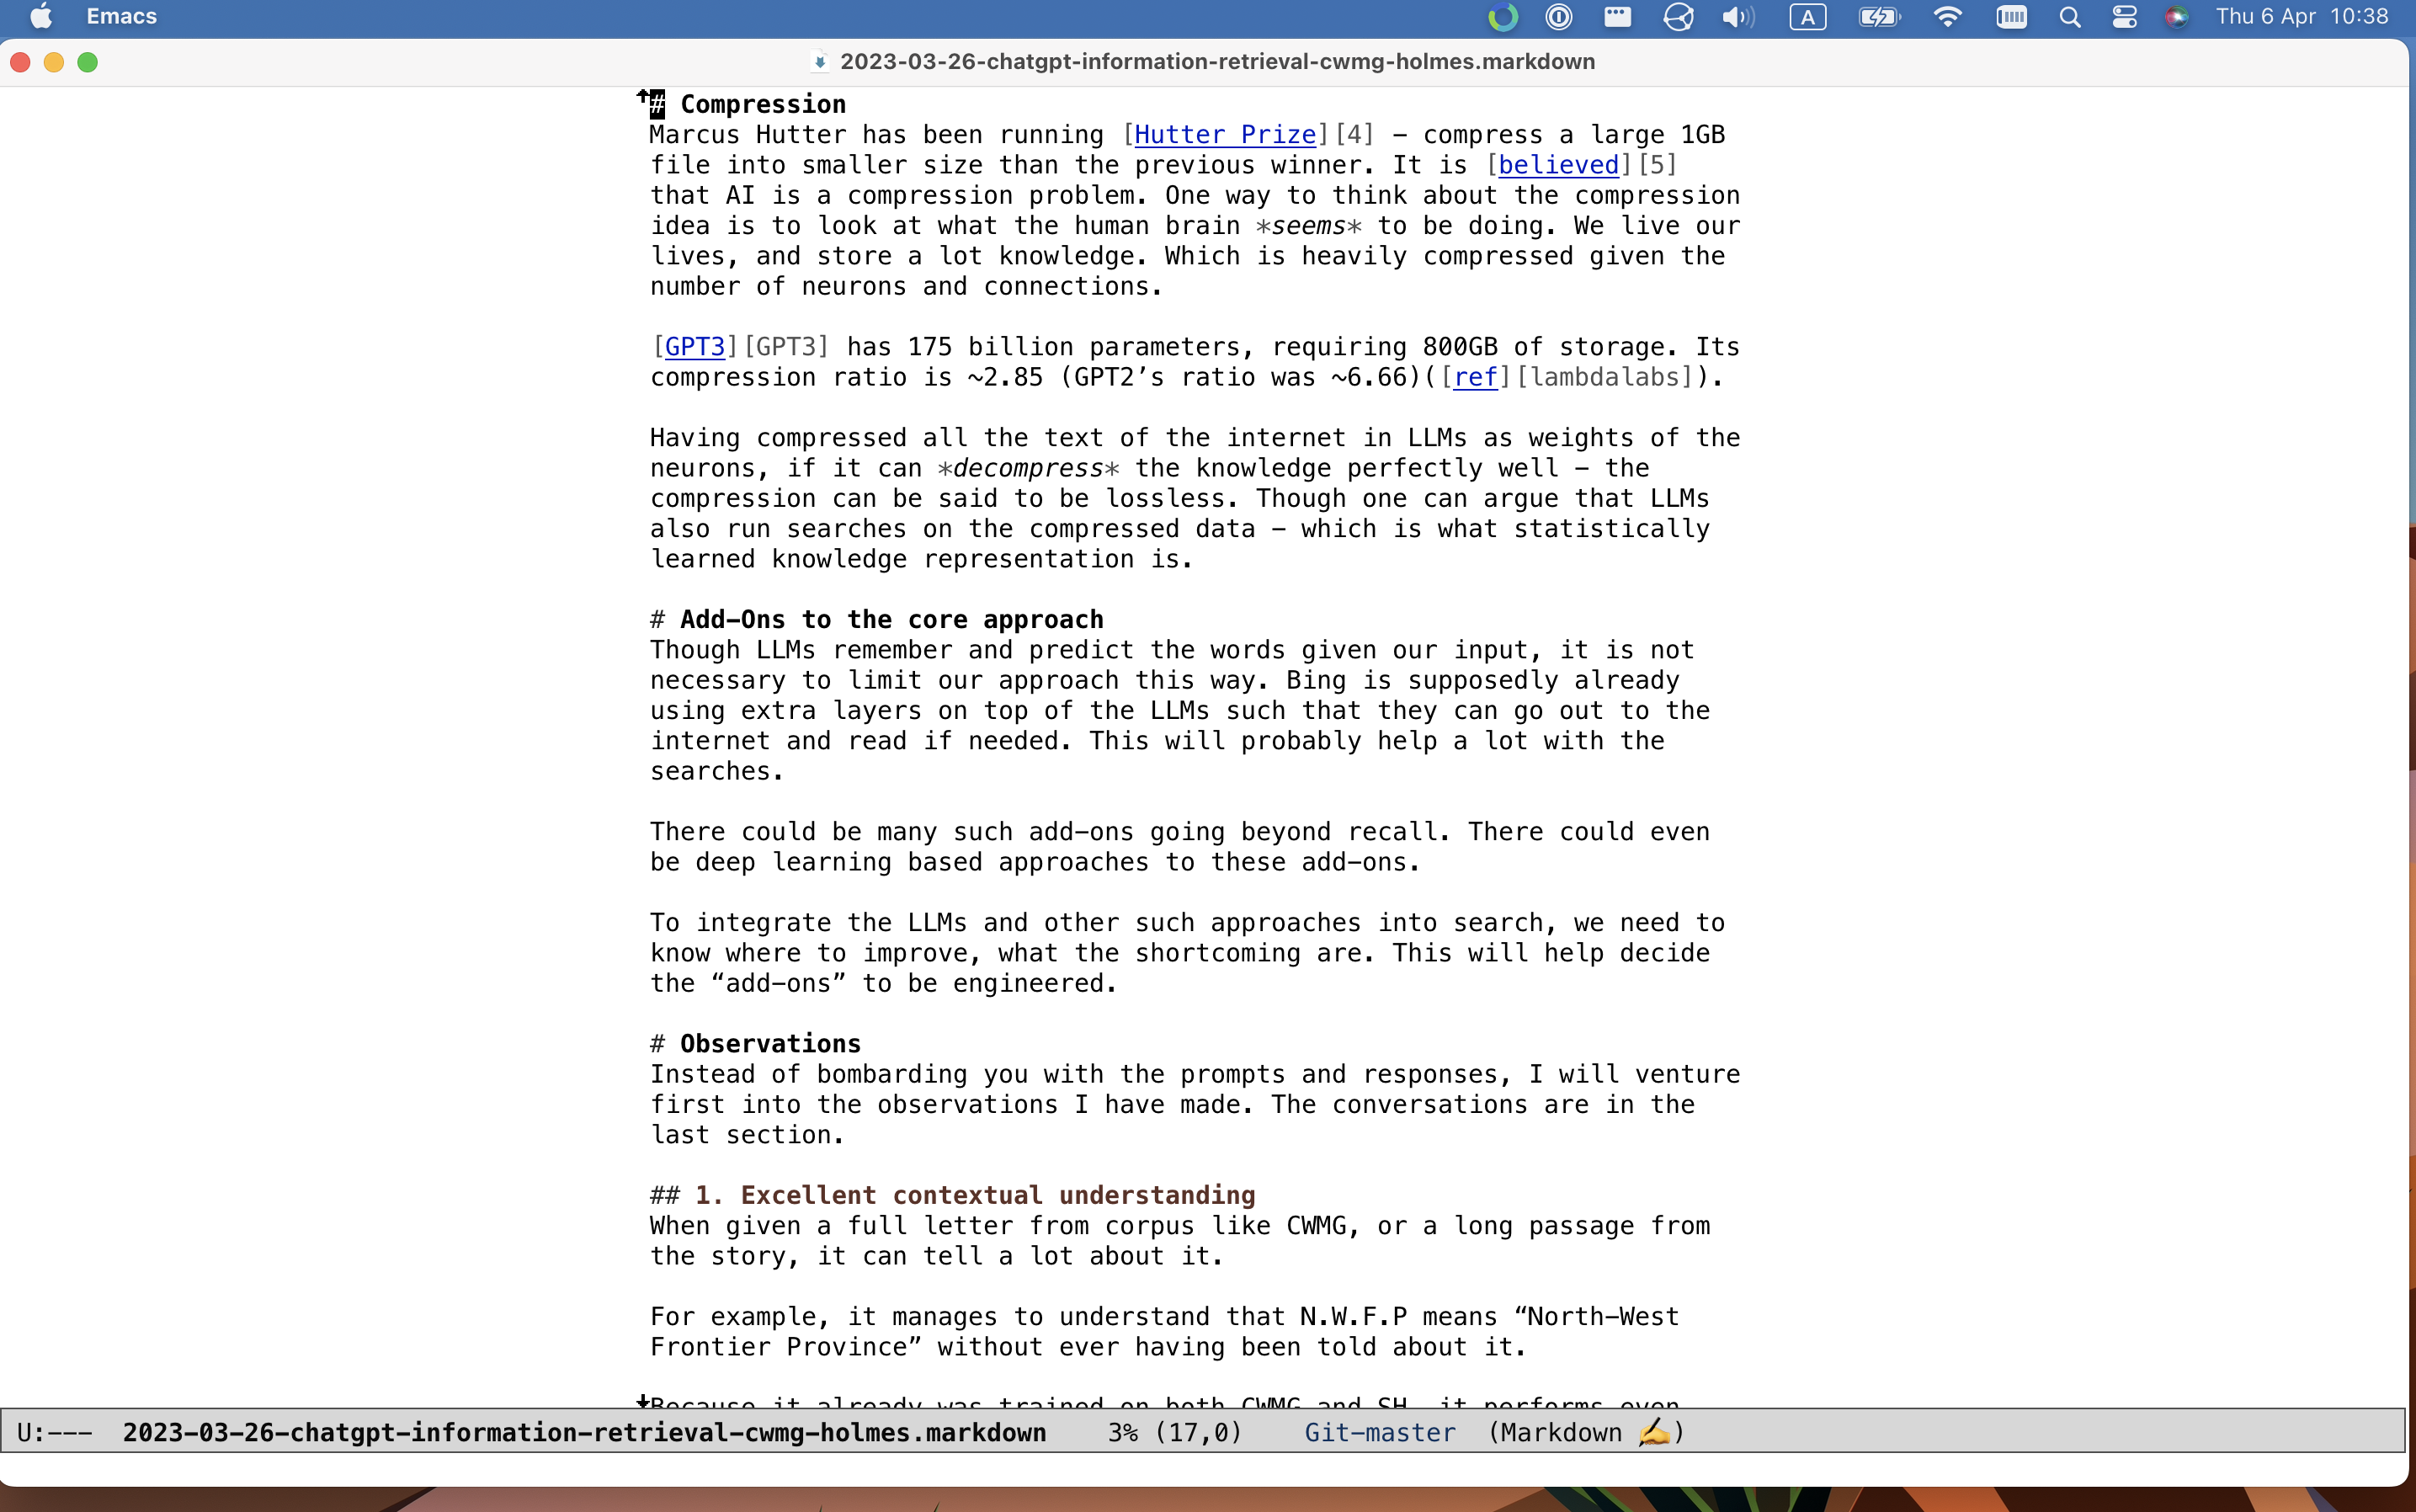 Markdown file in Emacs